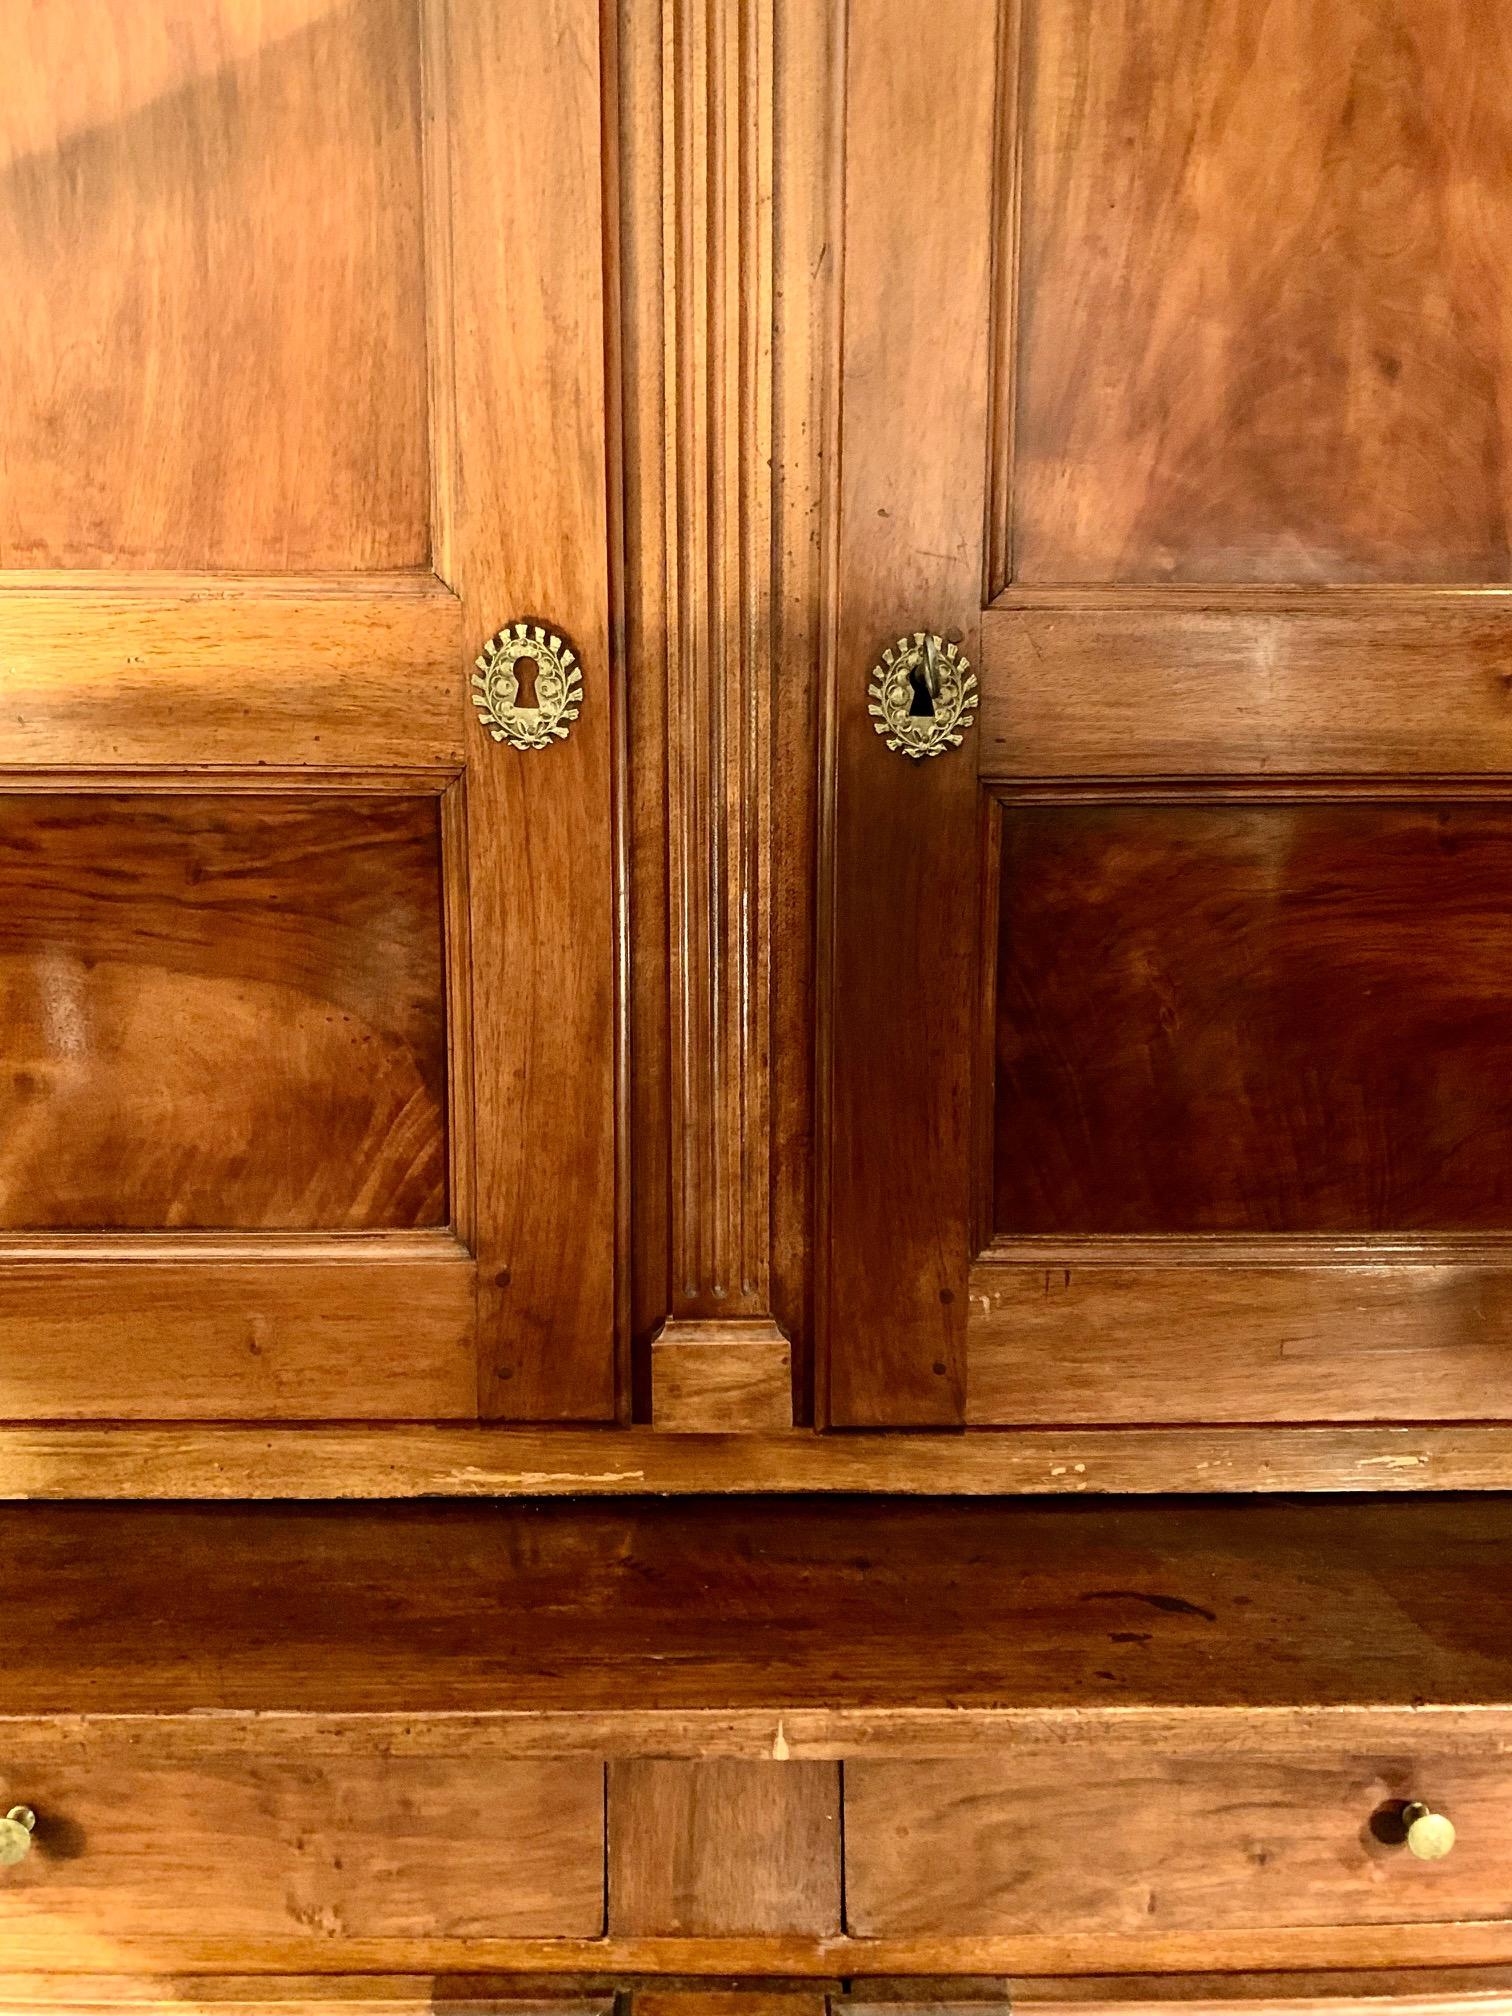 19th century French Directoire period oak bookcase or cabinet 
t has two parts that can be separated for easier transport. the upper part has a height of 125 cm with two doors and three adjustable shelves inside, the keyholes are in bronze.
the